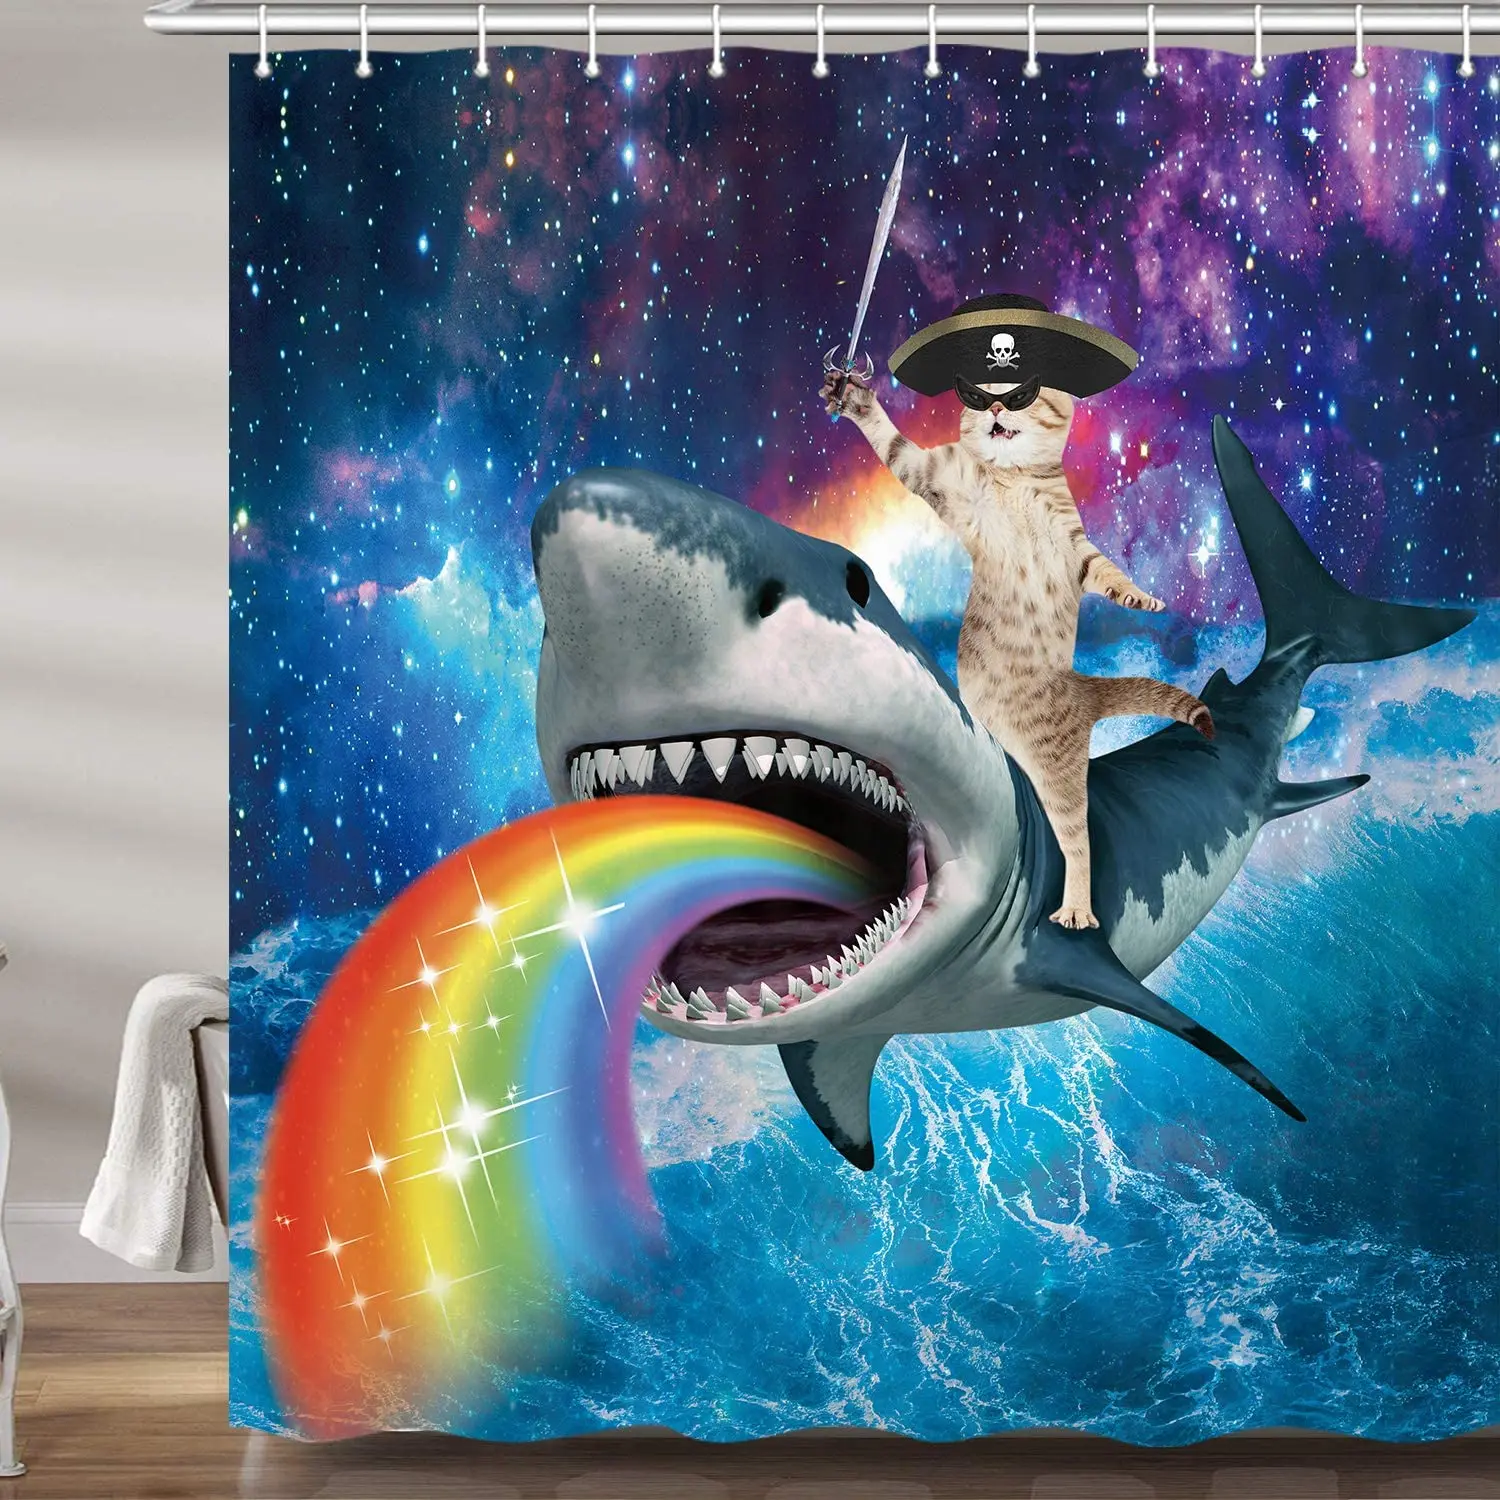 

Funny Pirate Cat Shower Curtains for Bathroom Cool Cat Riding Shark Whale In Universe Galaxy Hilarious Kids Bath Curtain Set